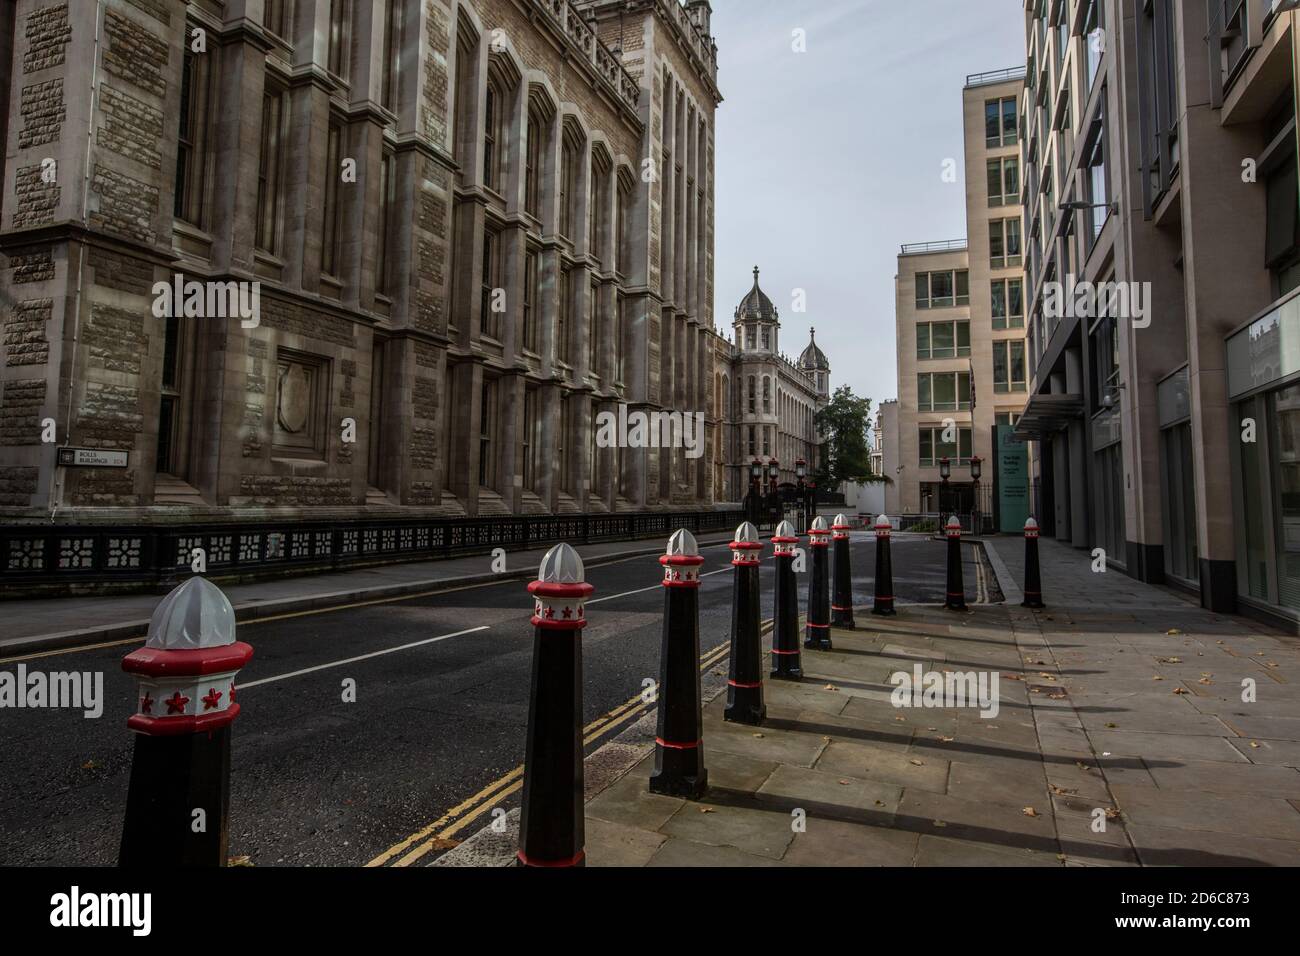 Rolls Building, Business and Property Courts of England, Fetter Lane, City of London, England, Vereinigtes Königreich Stockfoto